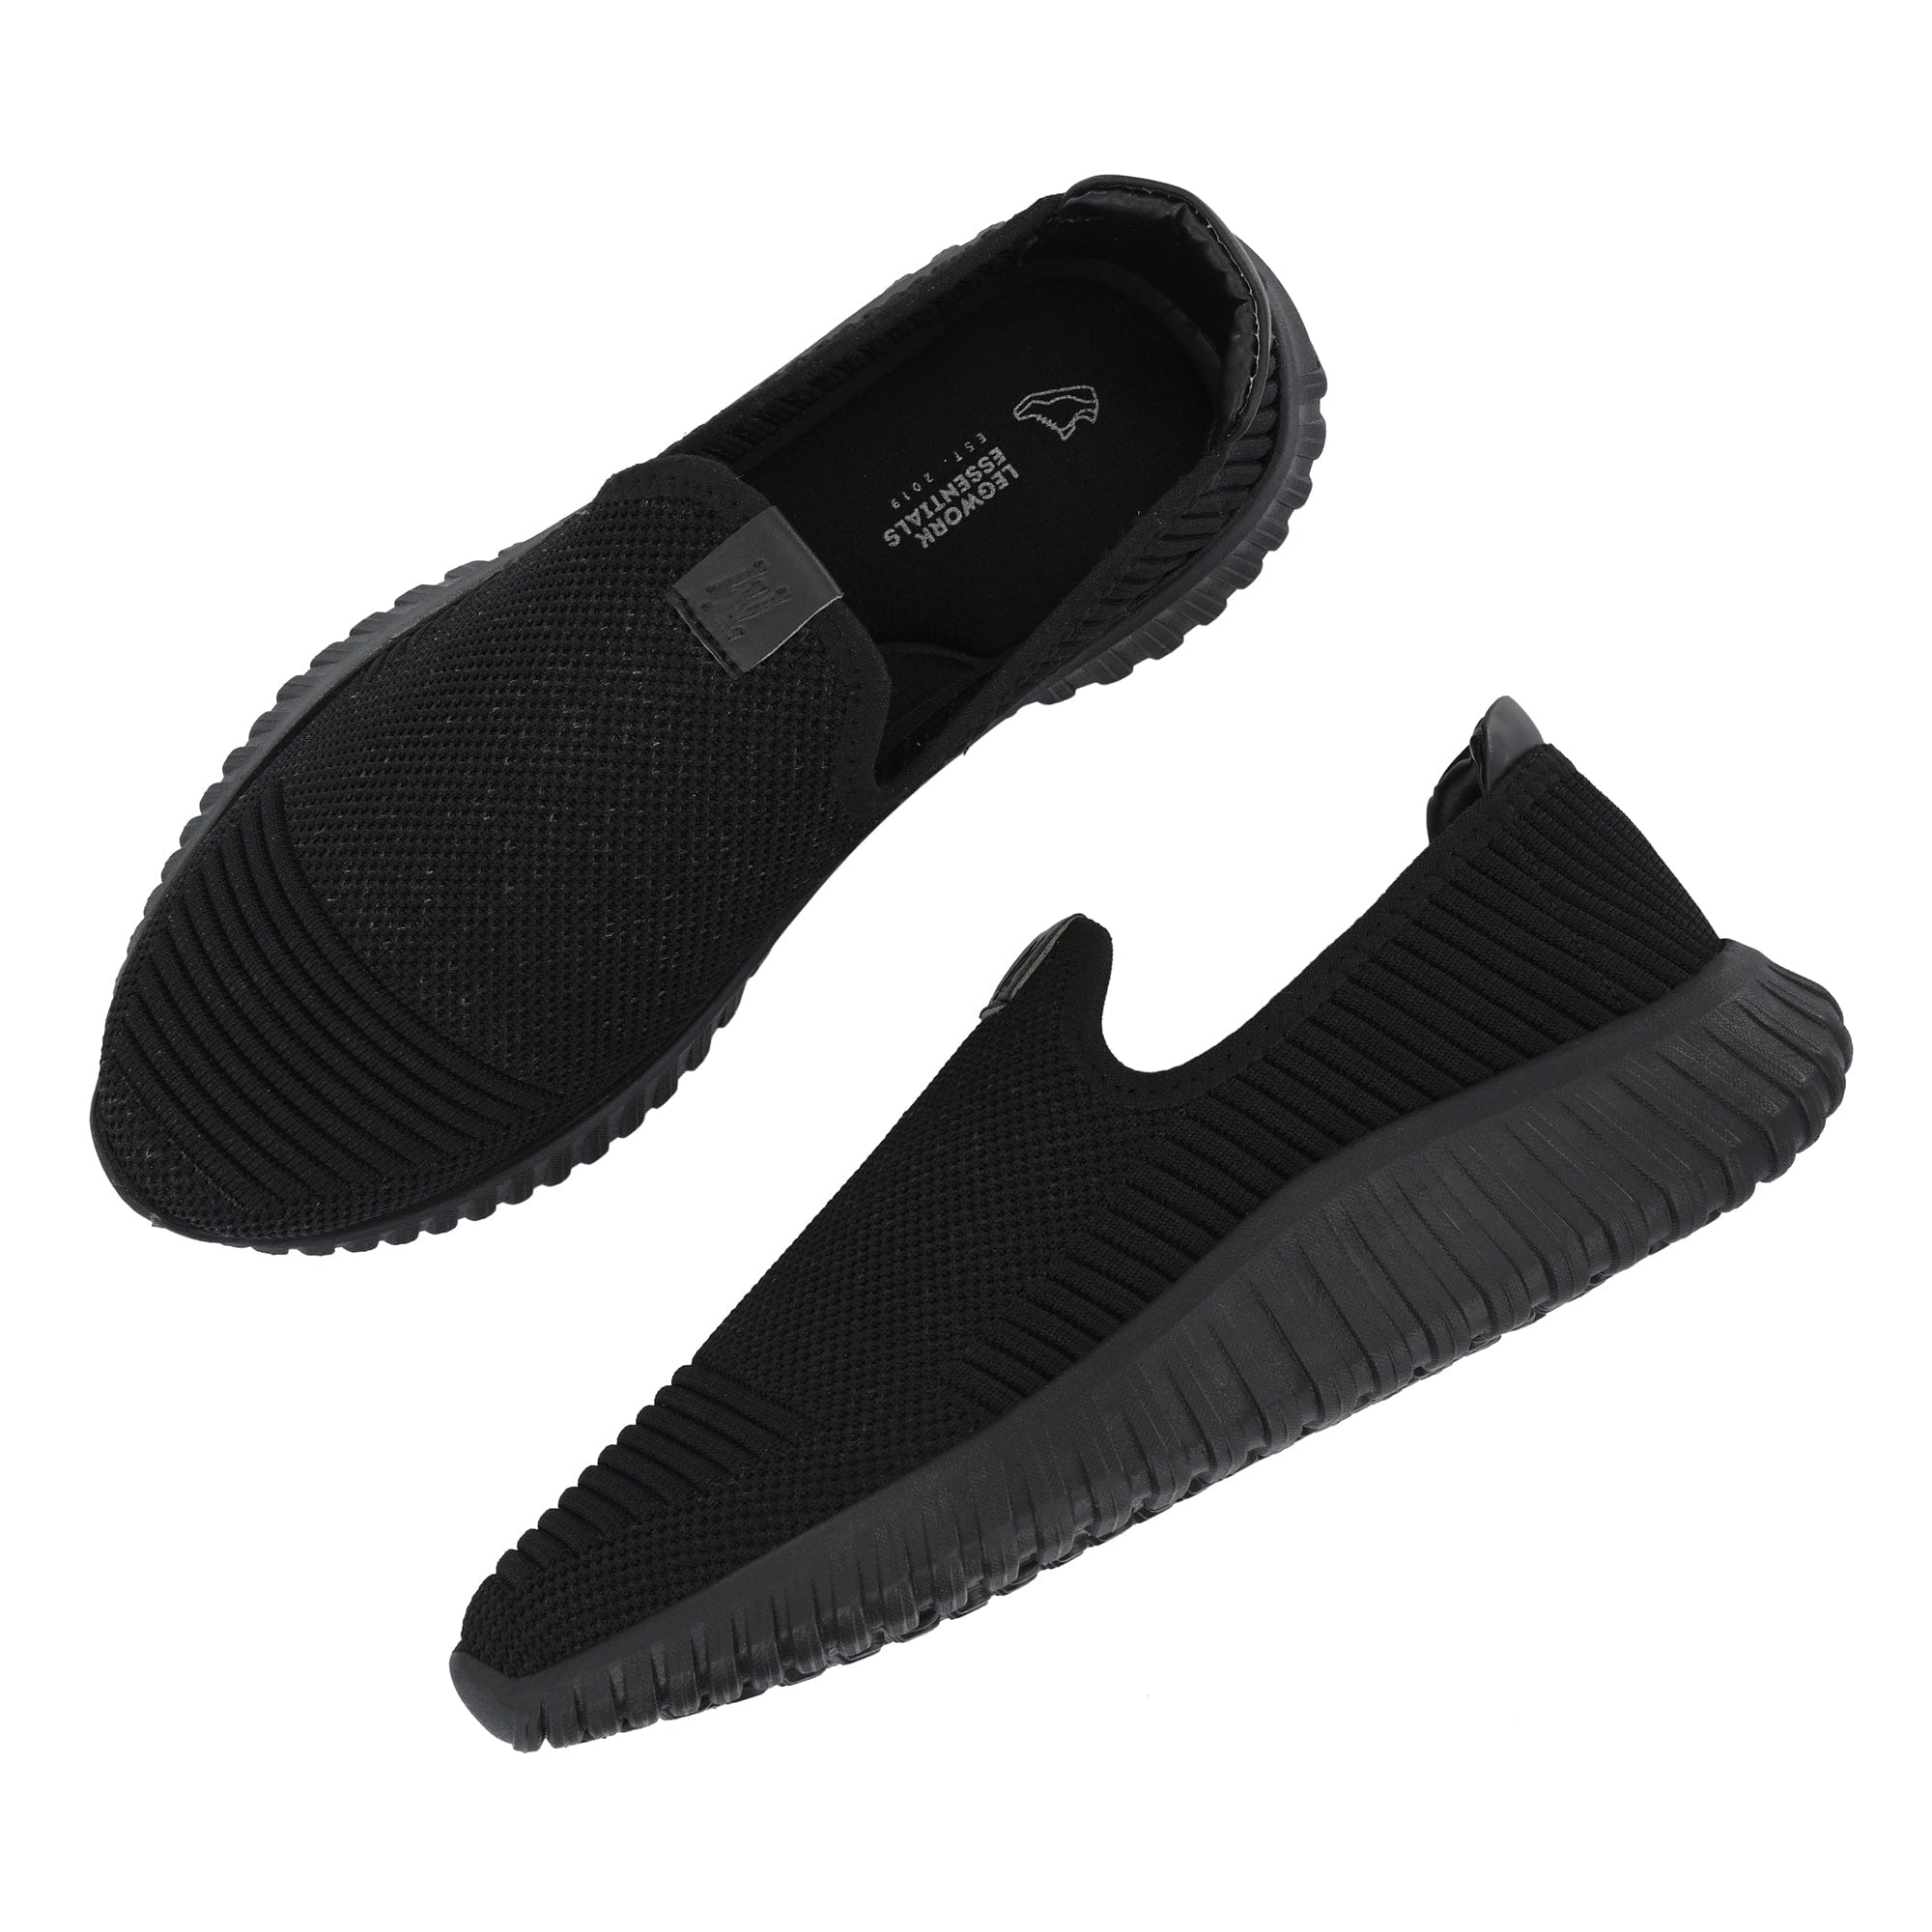 Legwork Drift Triple Black Comfortable ProKnit Sneakers Shoes made with 100% Recycled Plastic Bottles